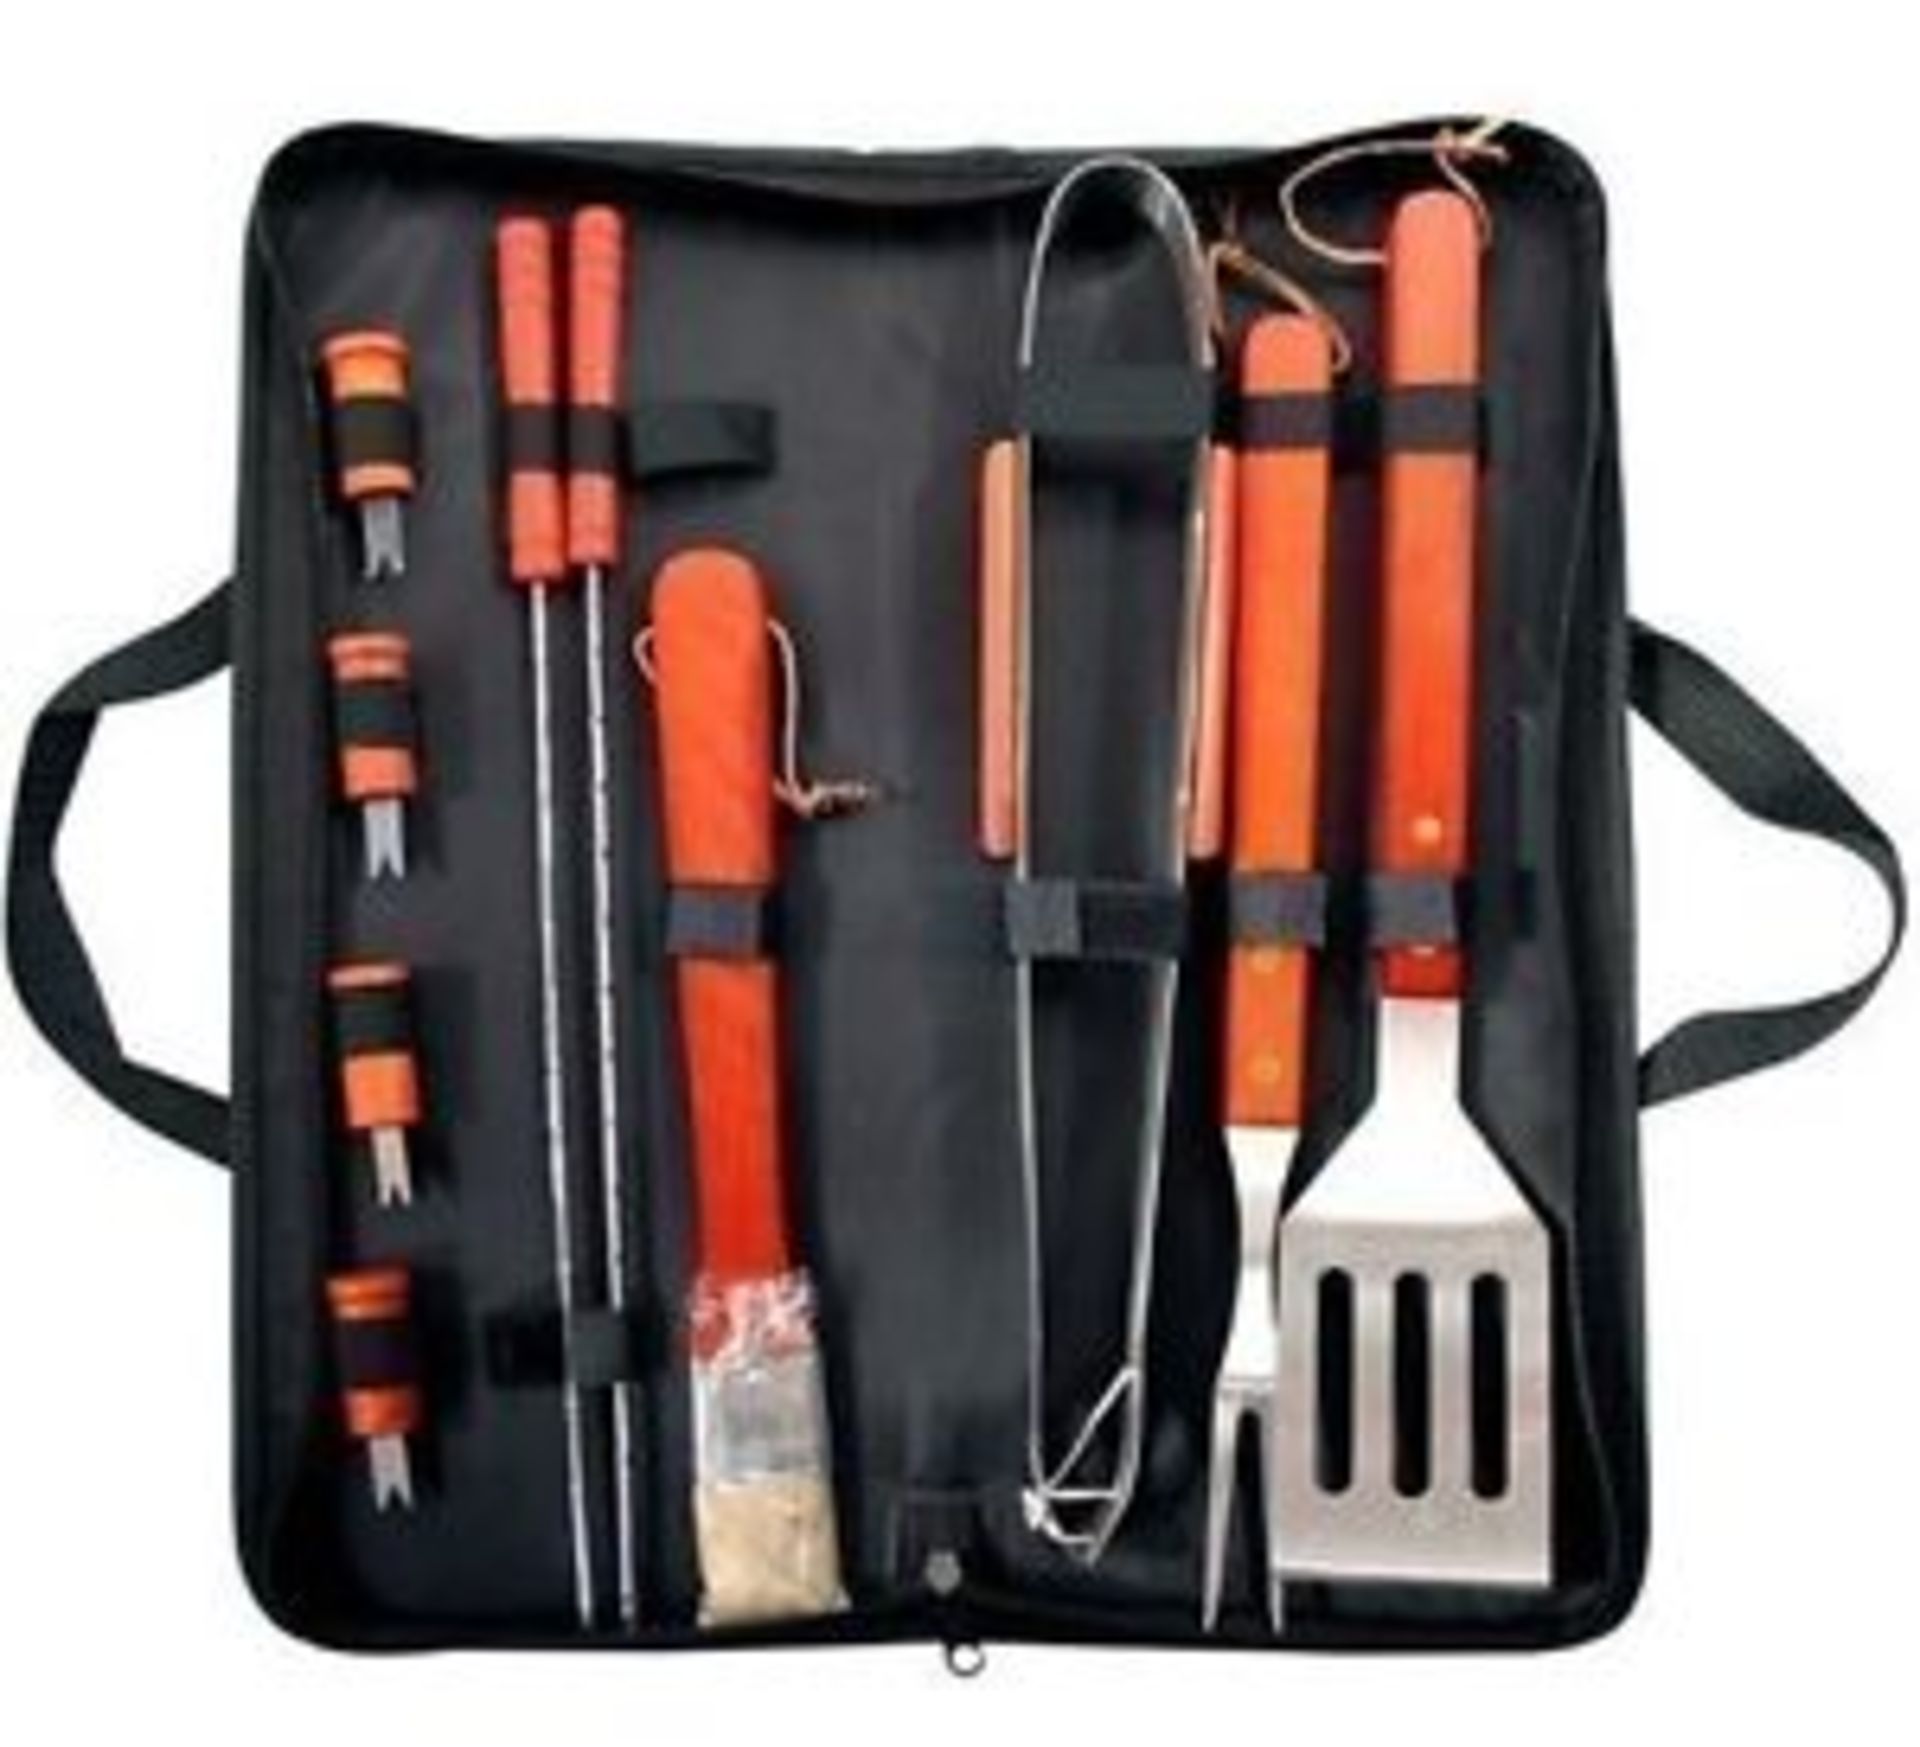 V Brand New 11 Stainless Steel BBQ Toolkit in Carry Case X 2 Bid price to be multiplied by Two